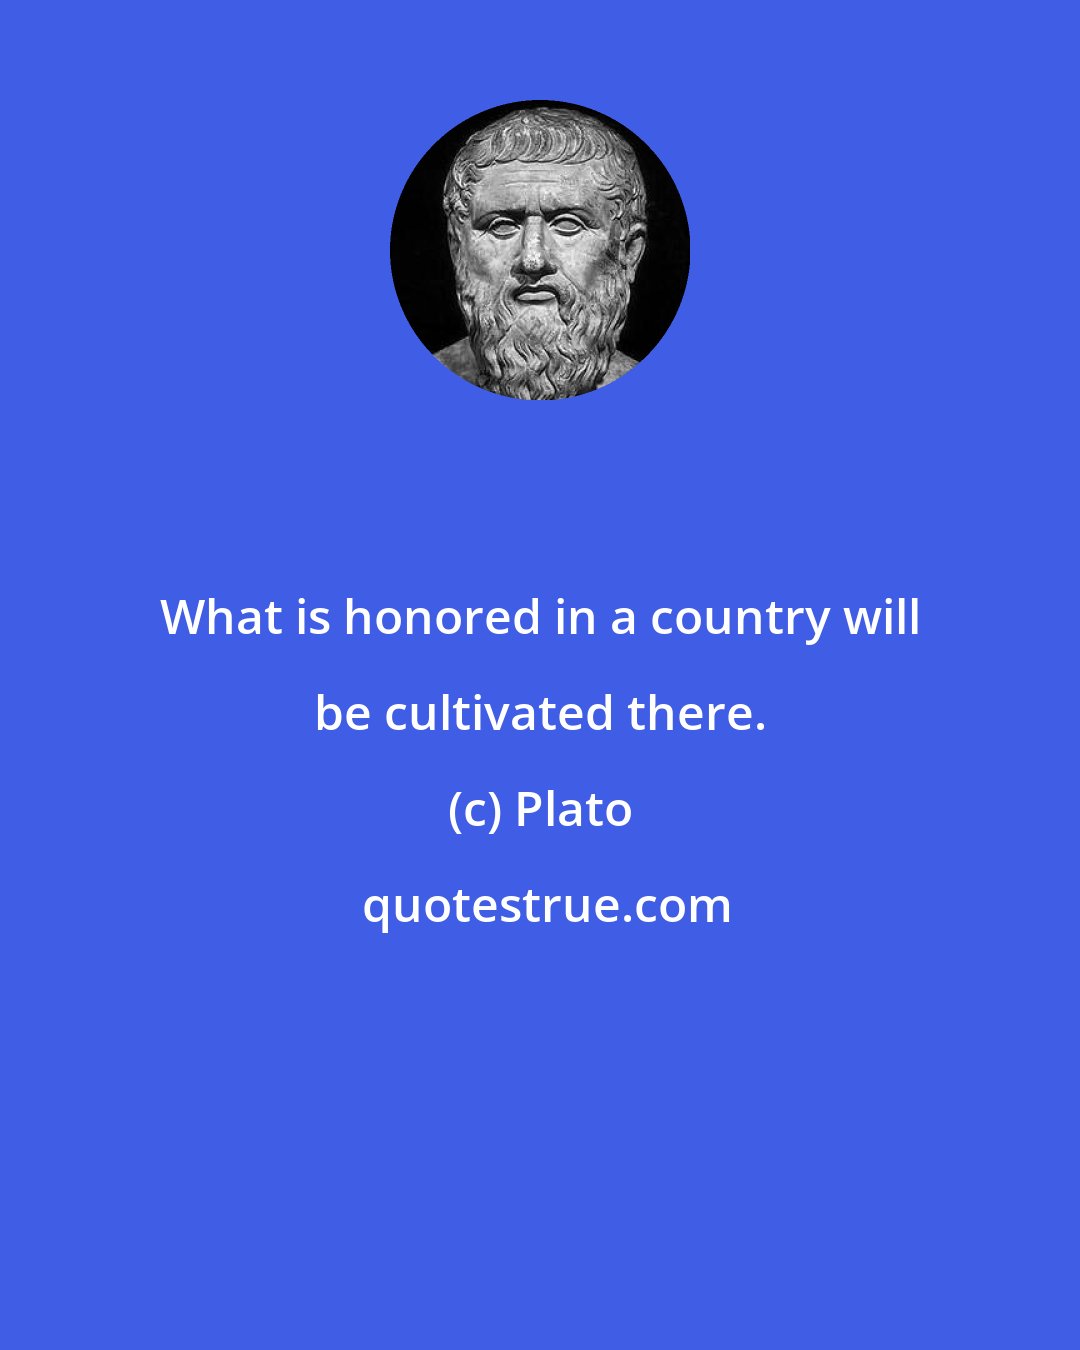 Plato: What is honored in a country will be cultivated there.